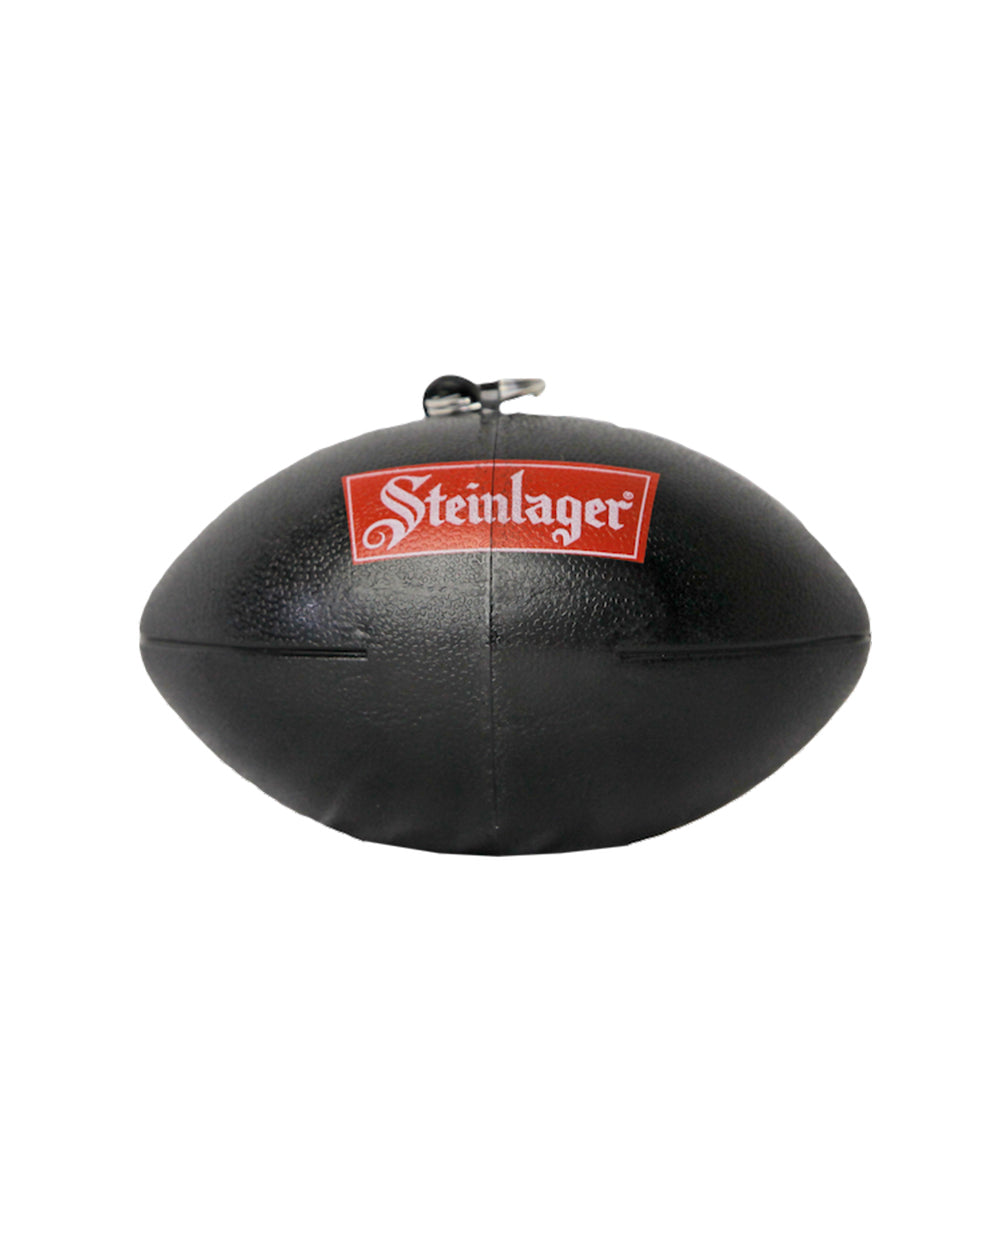 Steinlager Rugby Ball Poncho -  Beer Gear Apparel & Merchandise - Speights - Lion Red - VB - Tokyo Dy merch